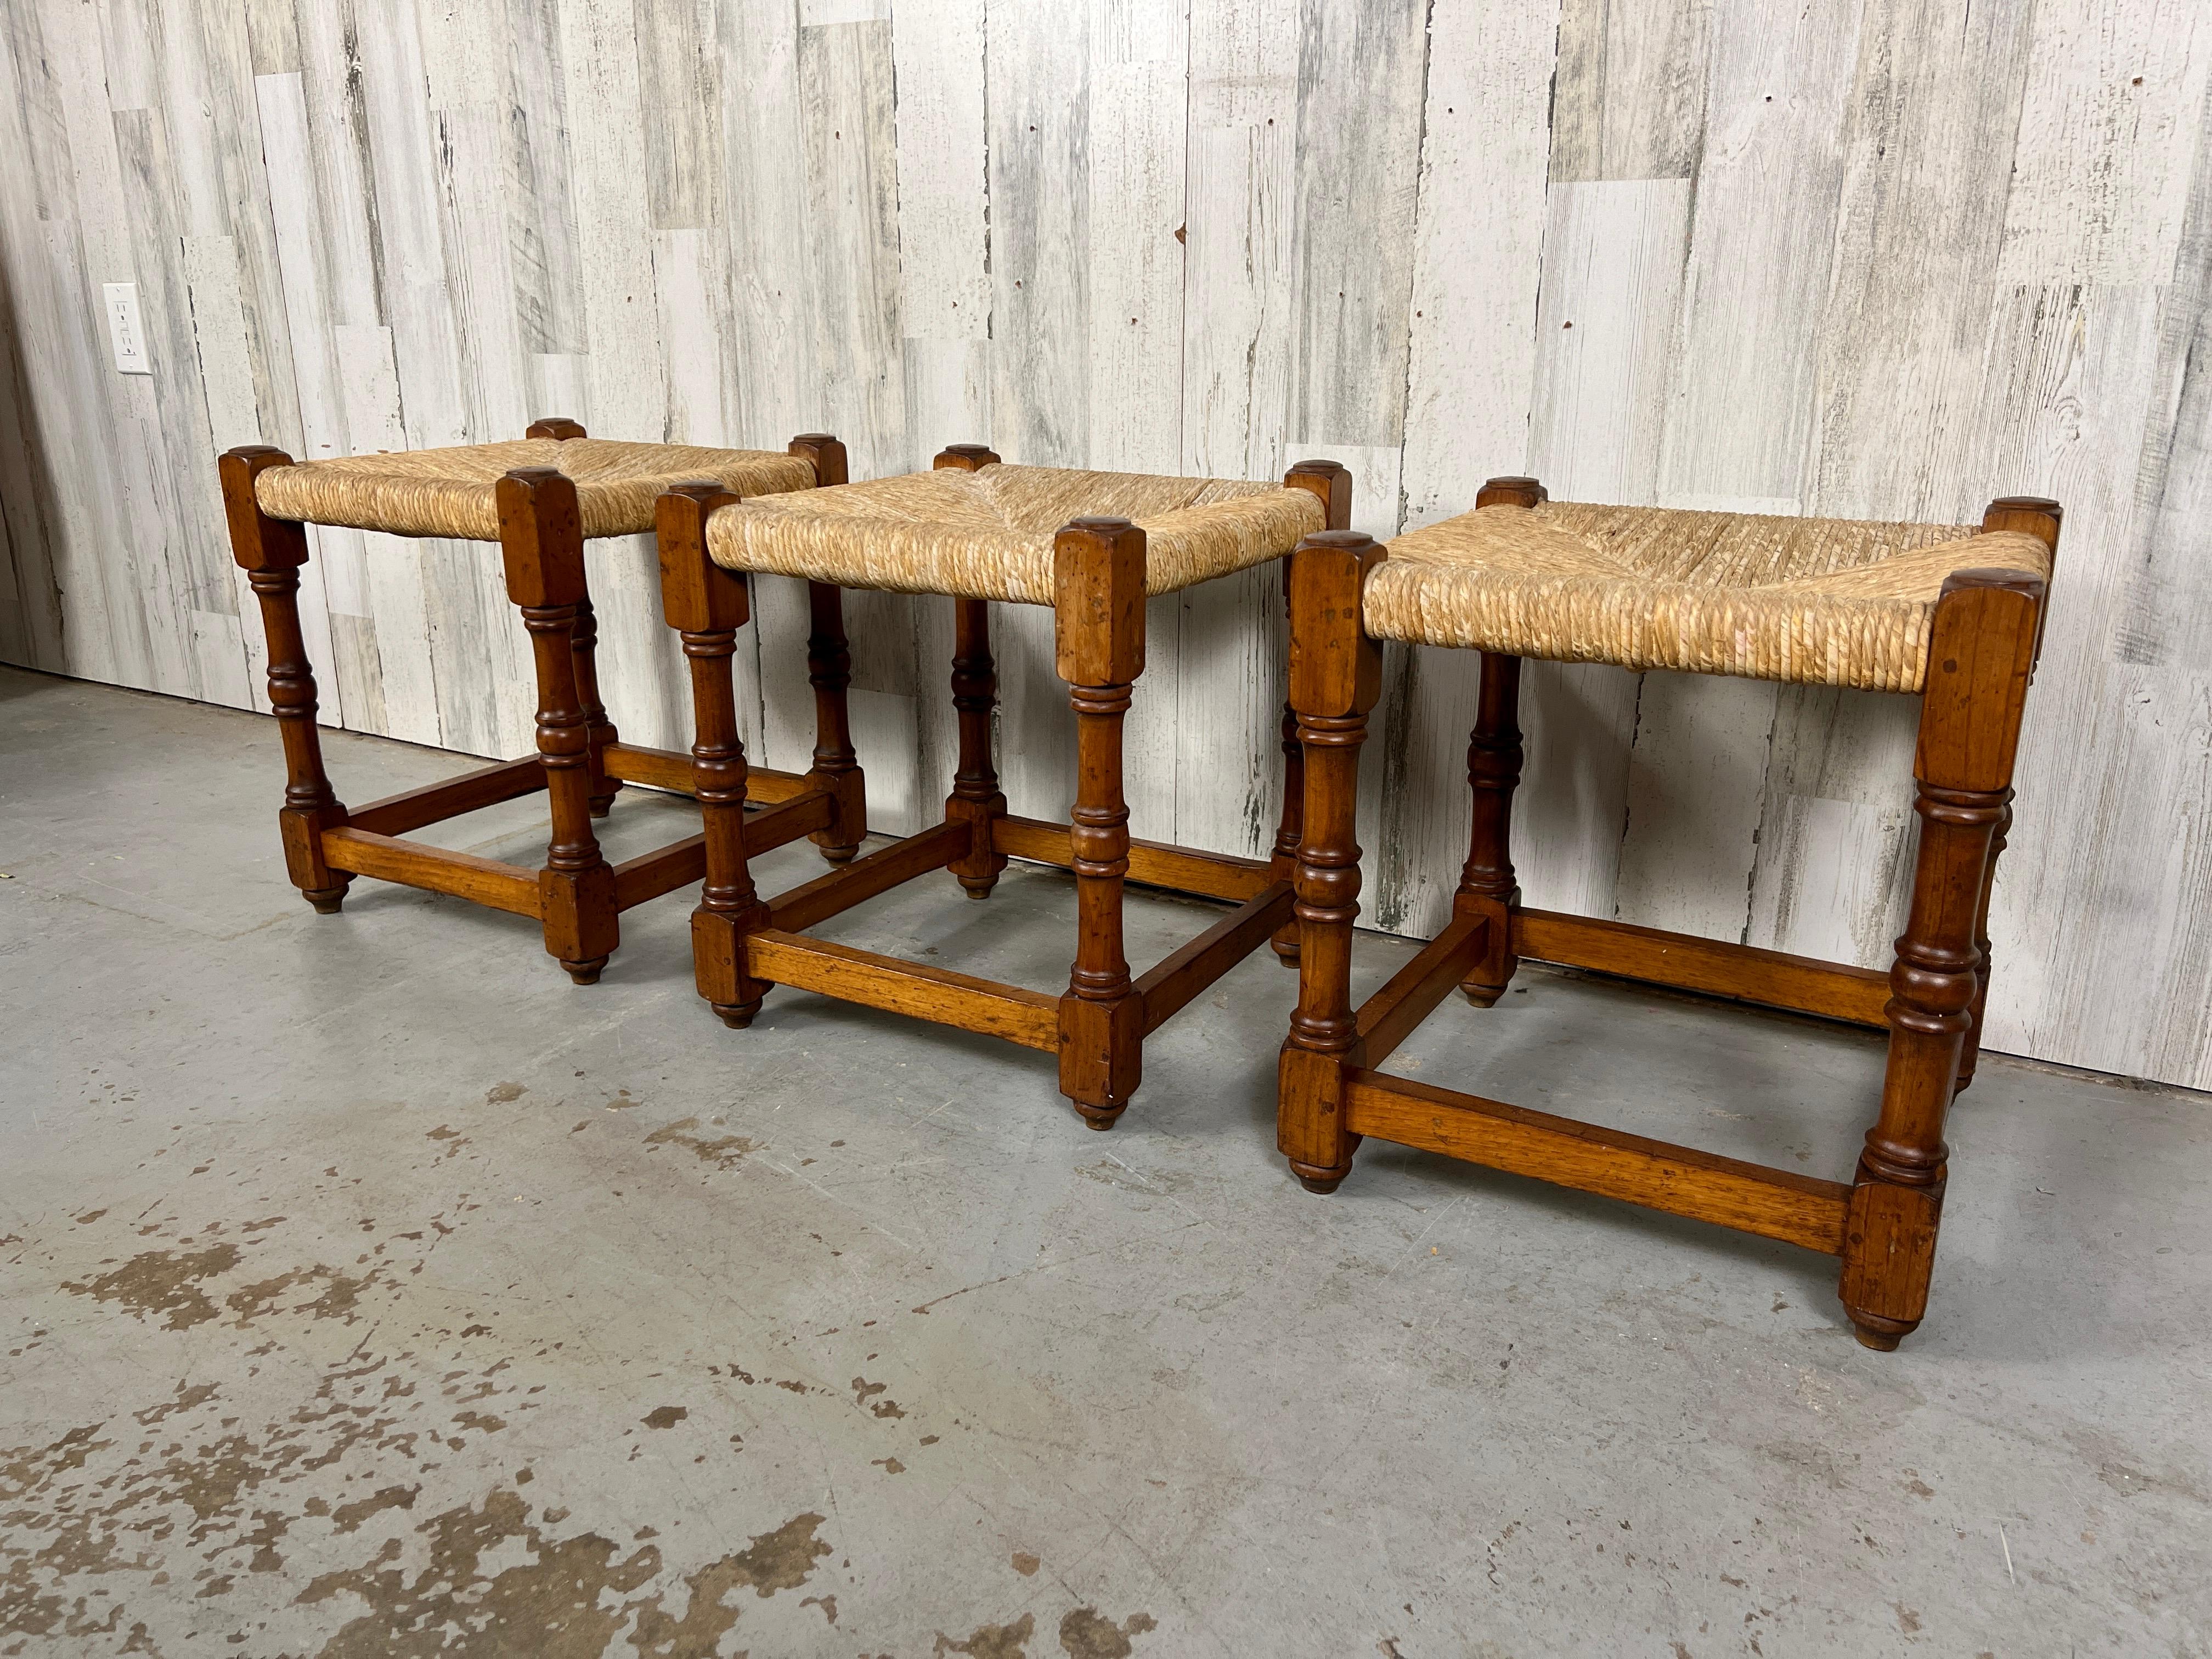 French Antique Rustic Wild Cherrywood Stools For Sale